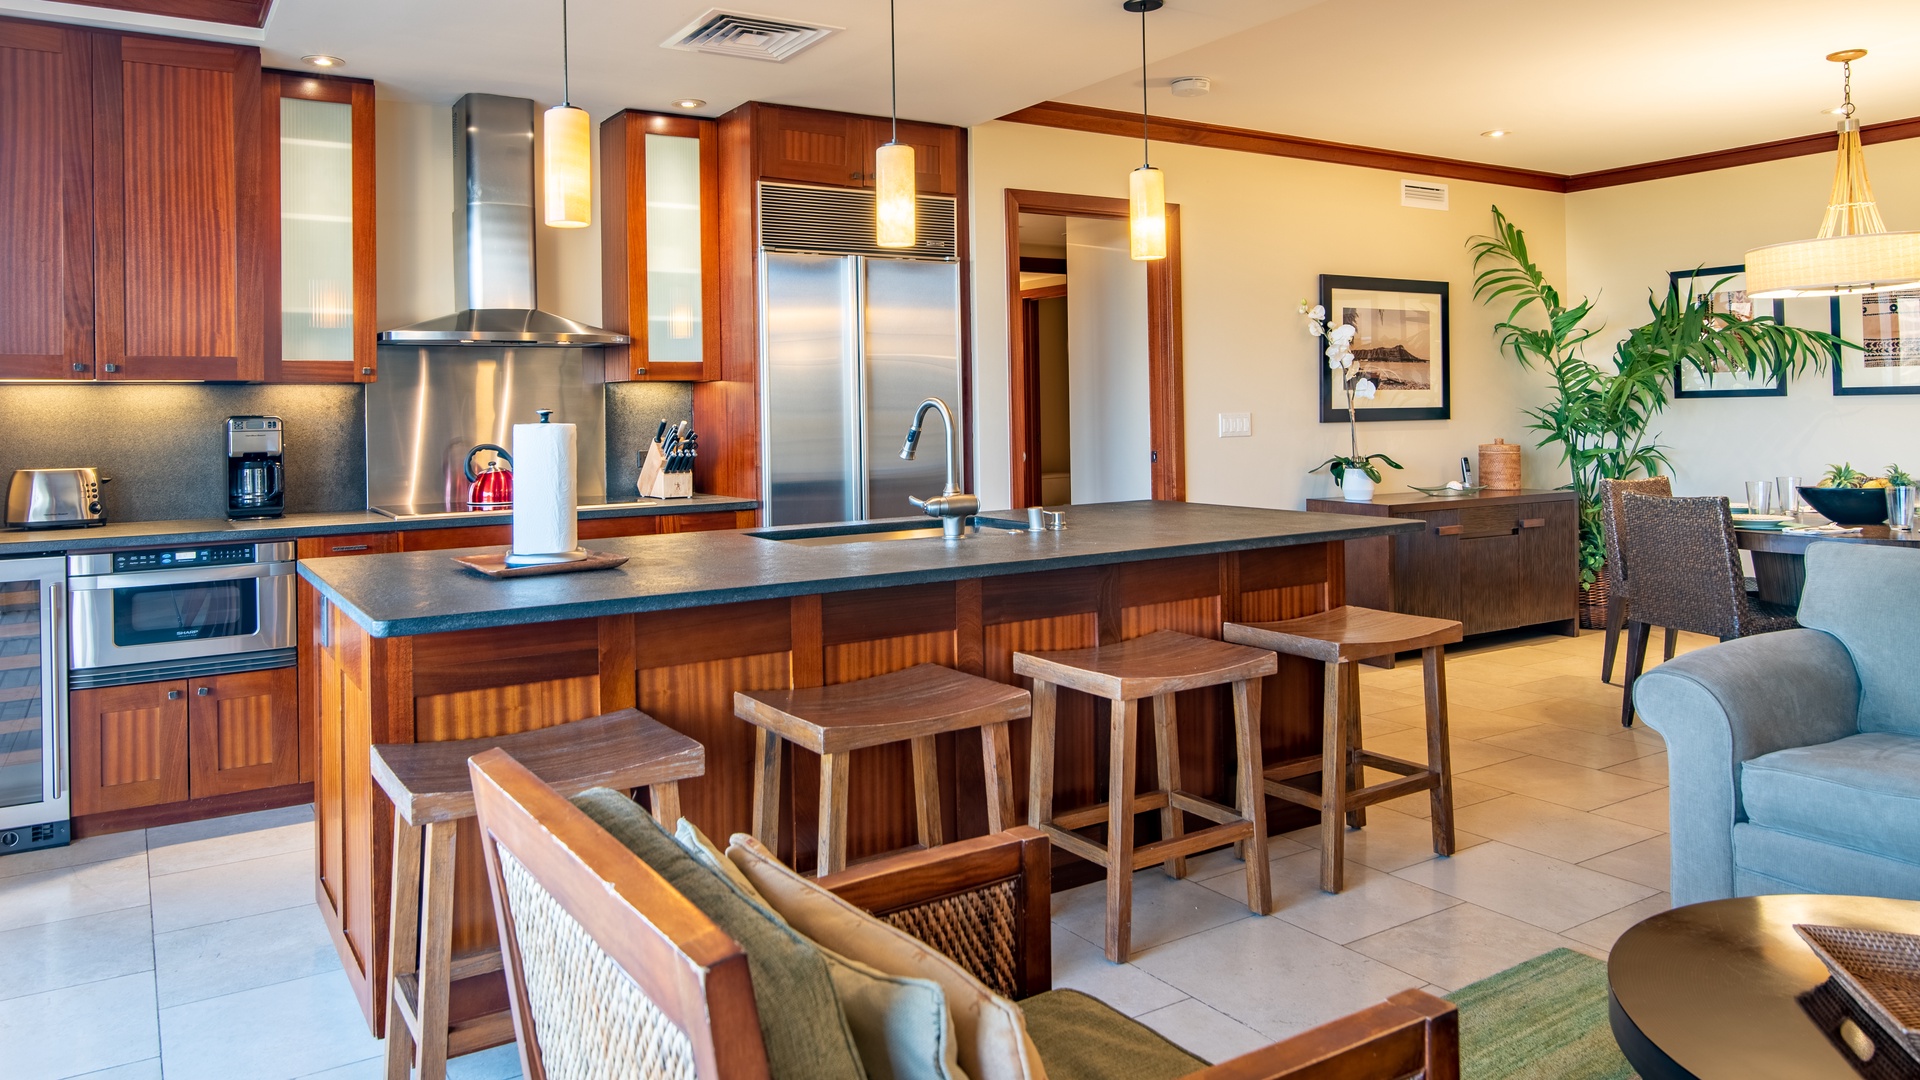 Kapolei Vacation Rentals, Ko Olina Beach Villas B505 - A well equipped kitchen with stainless steel appliances and bar seating.